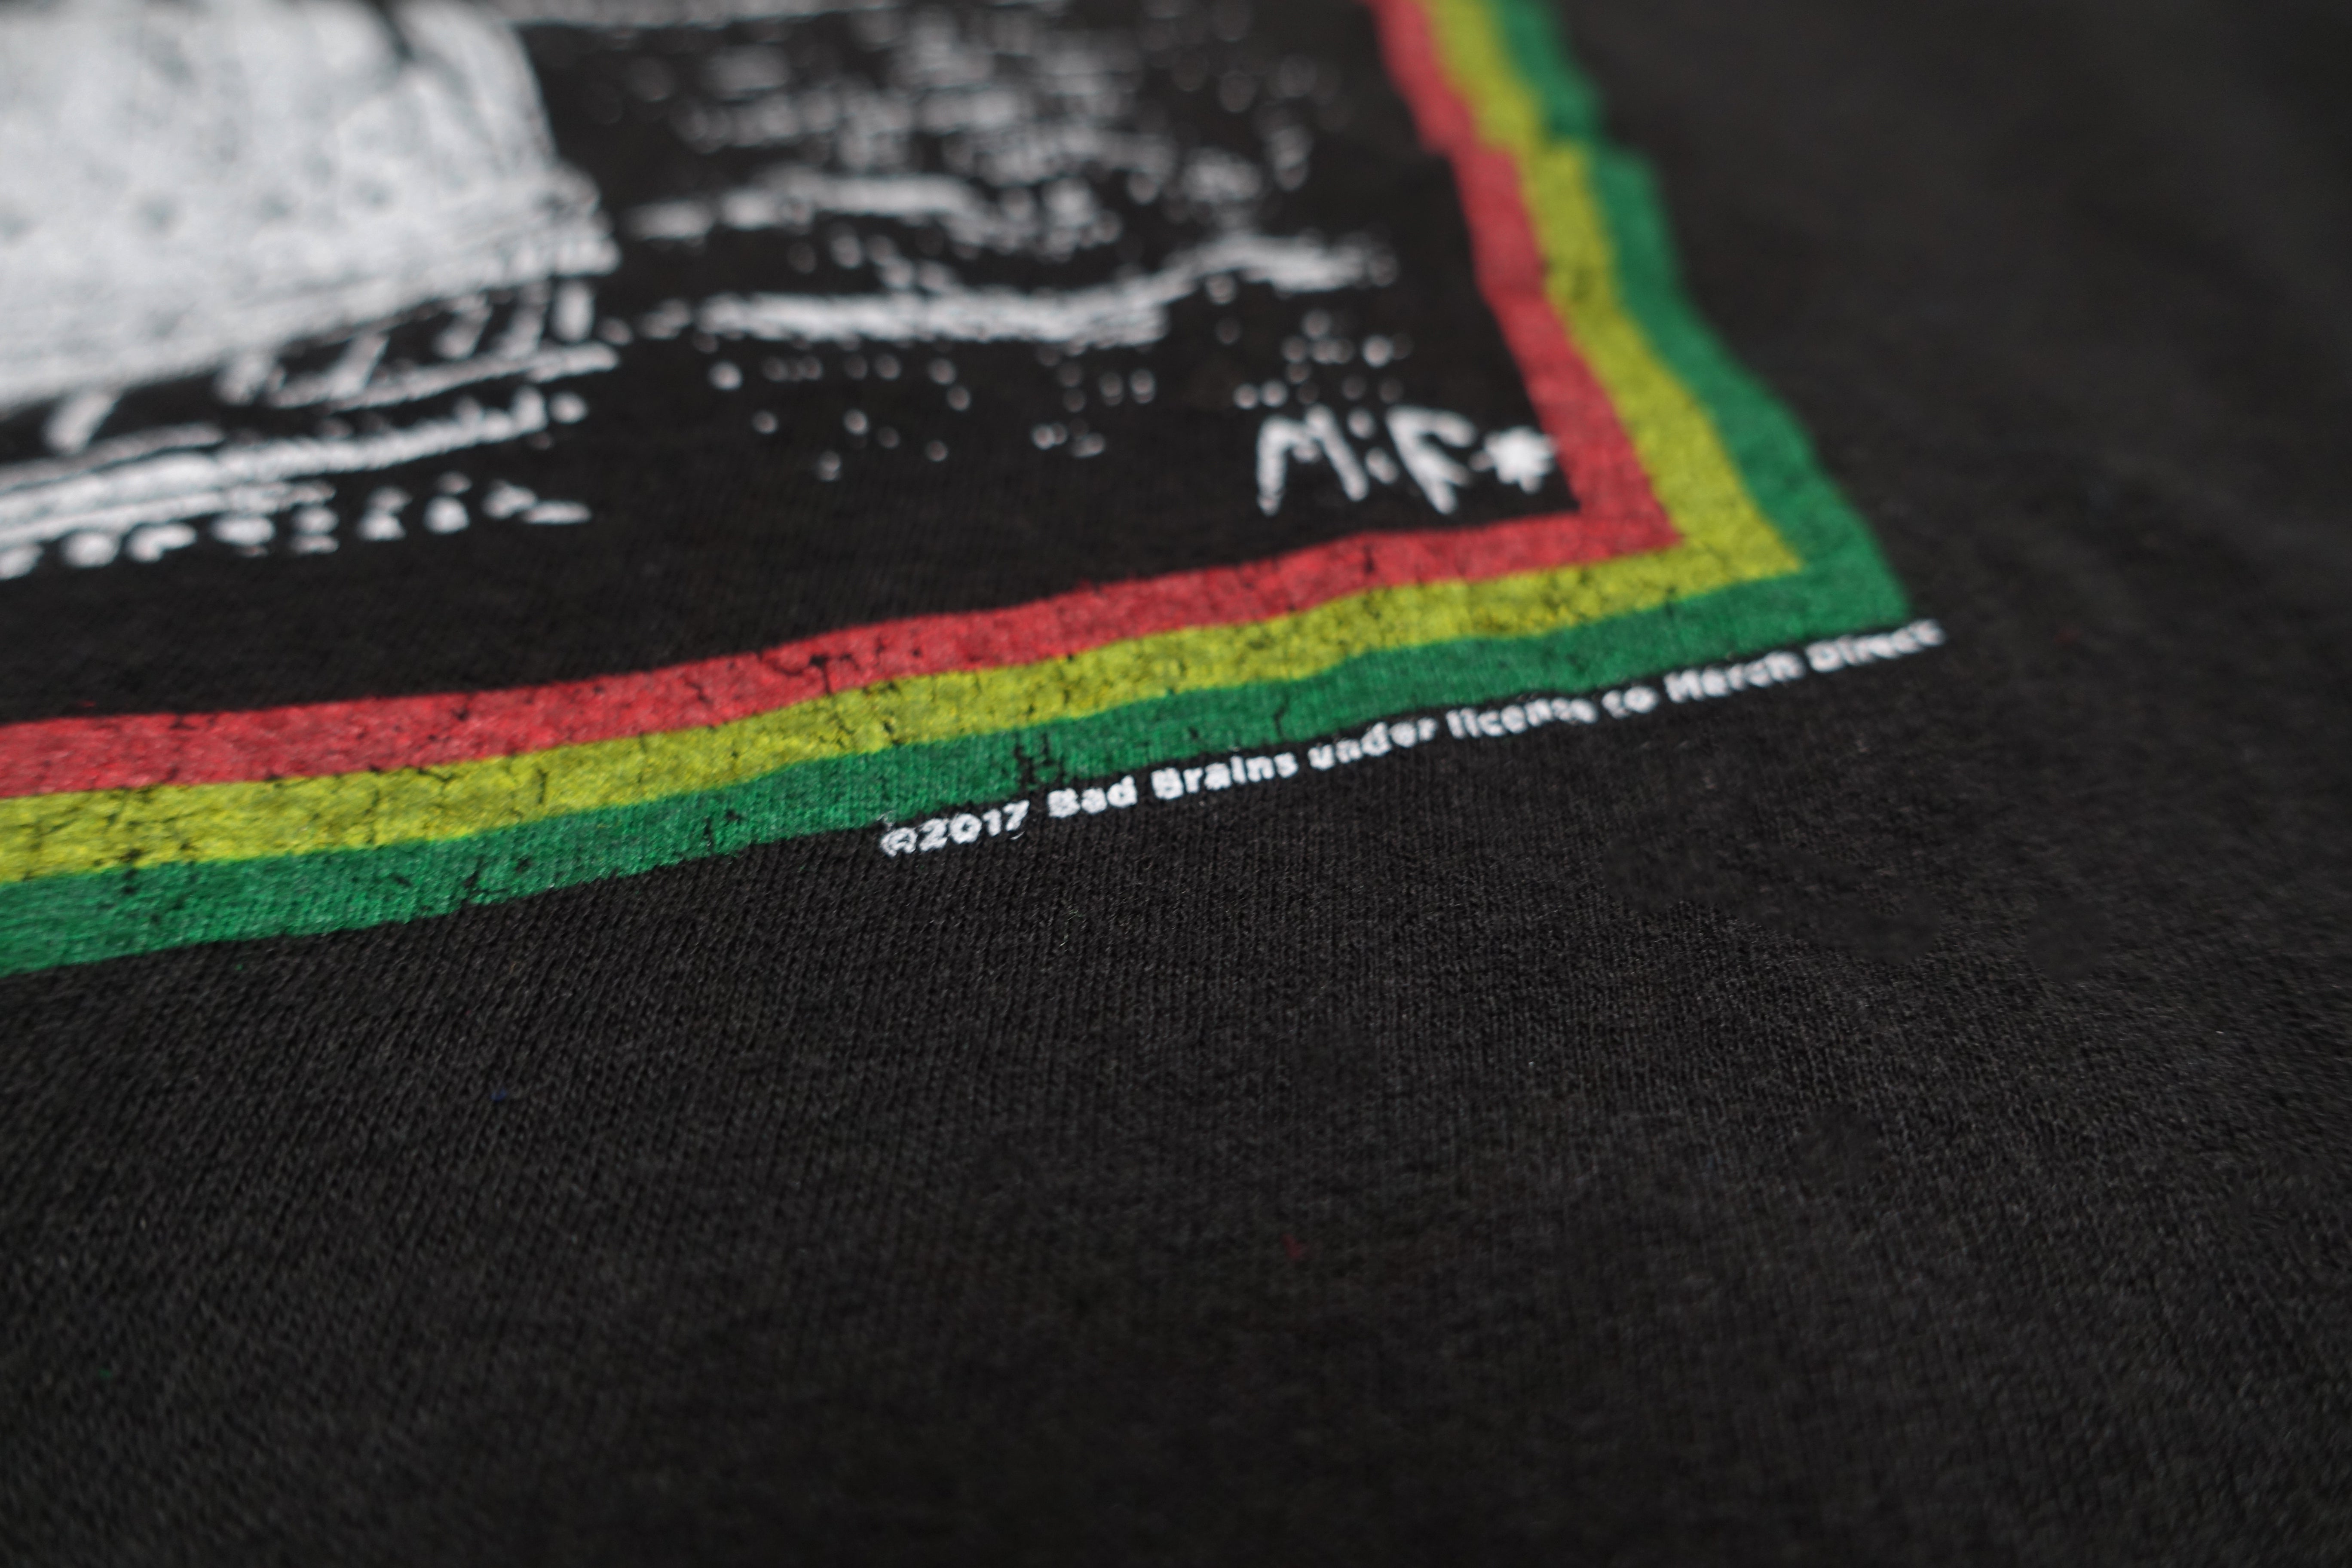 Bad Brains - Self Titled Official Re-issue Shirt Size Small